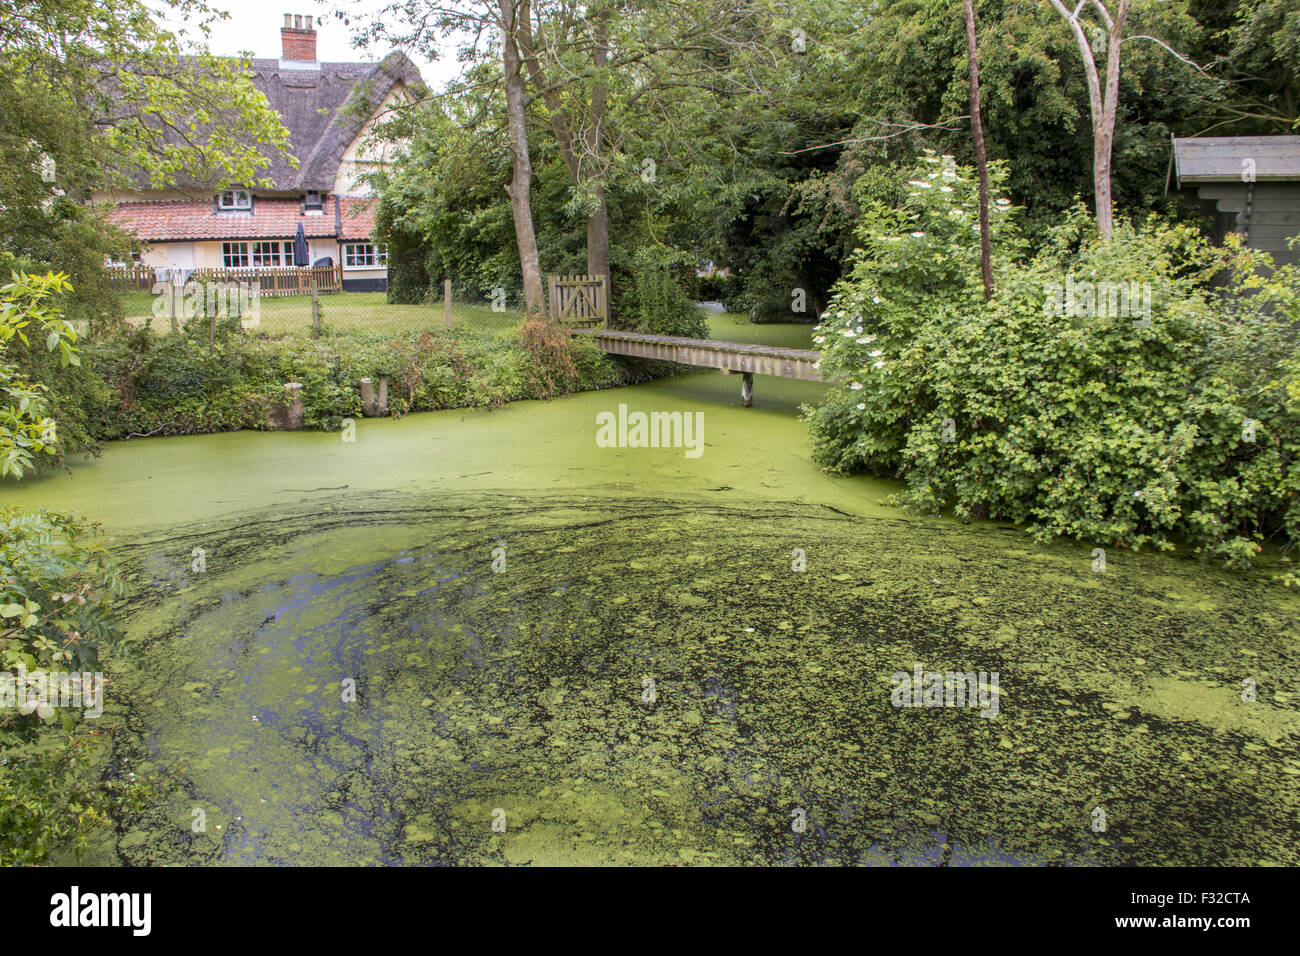 Duckweed is a rapidly spreading aquatic plant that deprives ponds of oxygen. Stock Photo